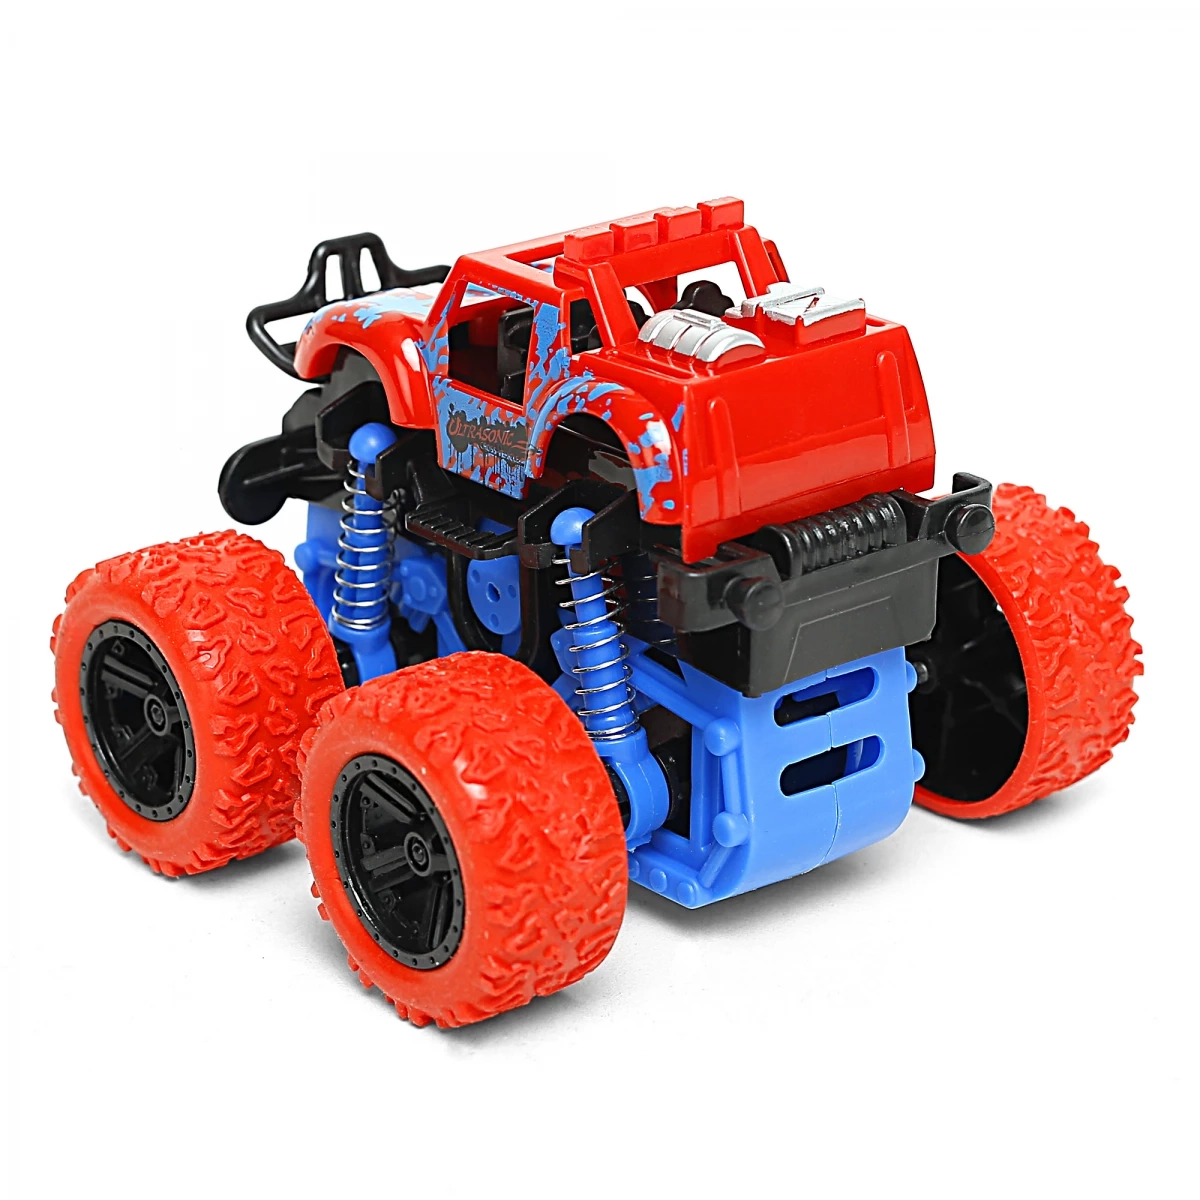 Ralleyz Friction Toy Car With Grip Wheels 4 Wheel Drive Force Amazing Kids Play Mini Toy Car Red 6Y+